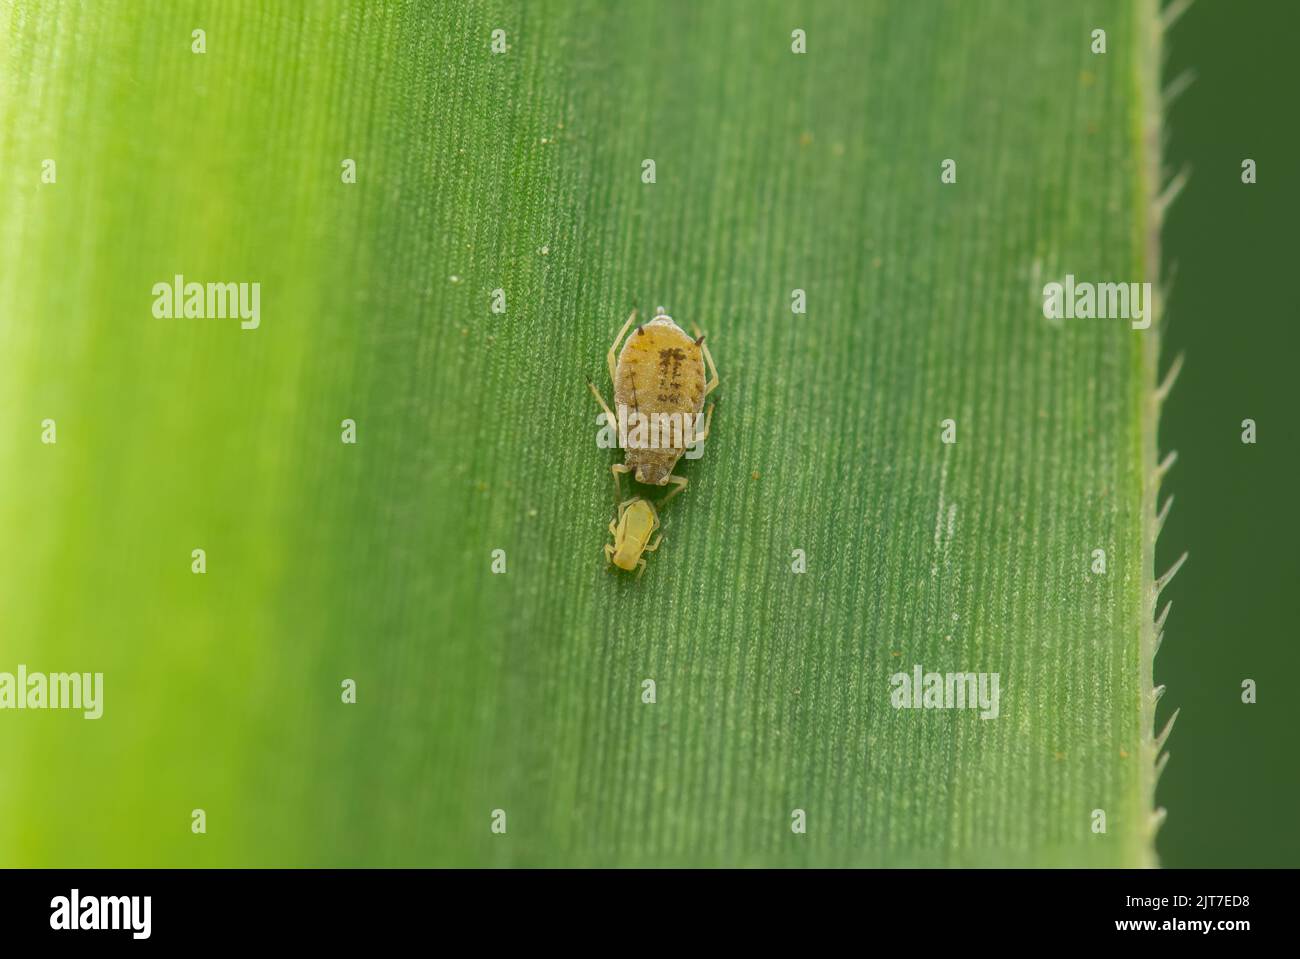 Sugarcane apdhid with young one on the sugarcane leaf. Its scientific name is Melanaphis sacchari which suck cell sap from leaf. Stock Photo